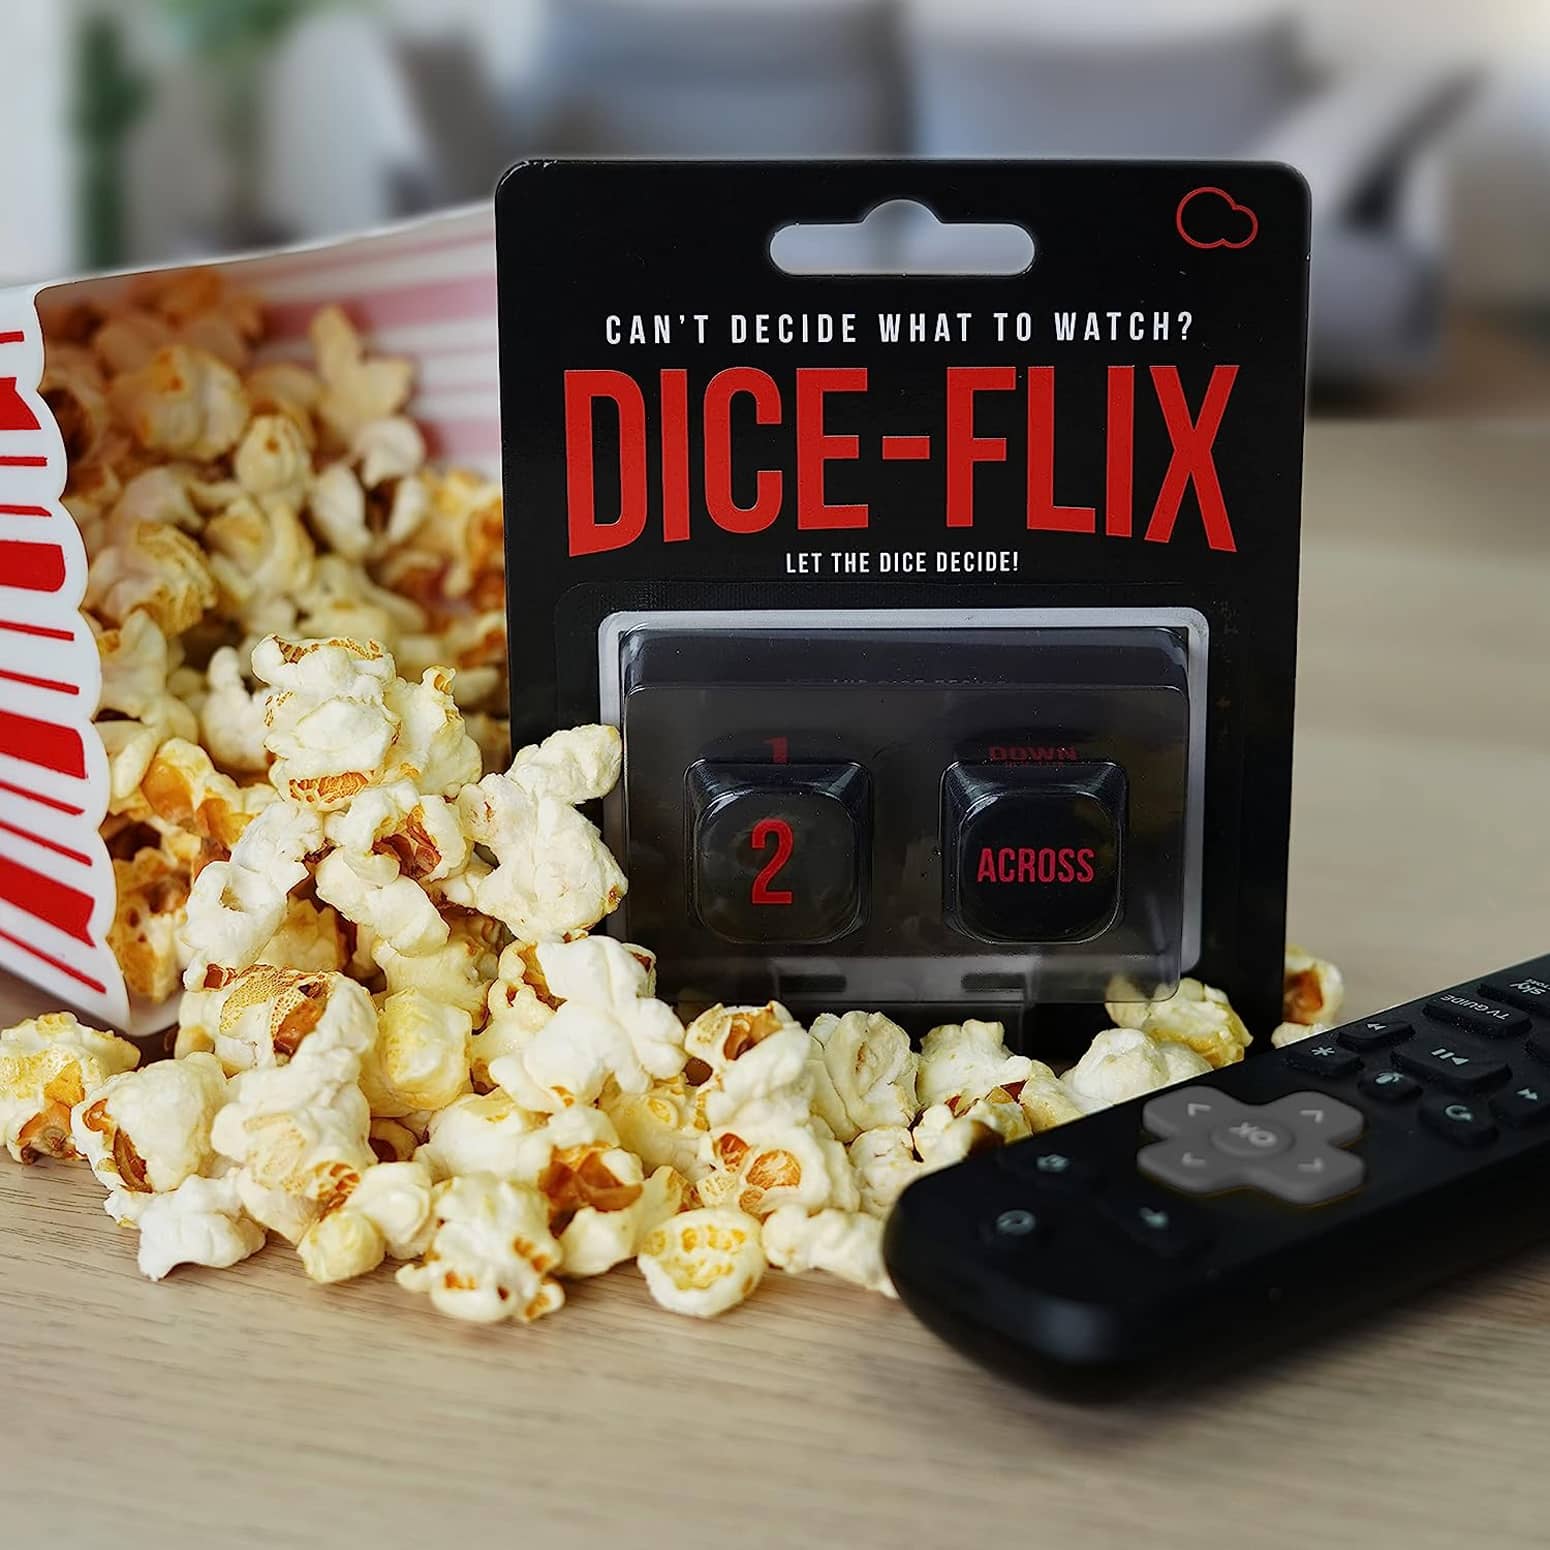 Dice-Flix - Let a Roll of the Dice Decide What You Watch